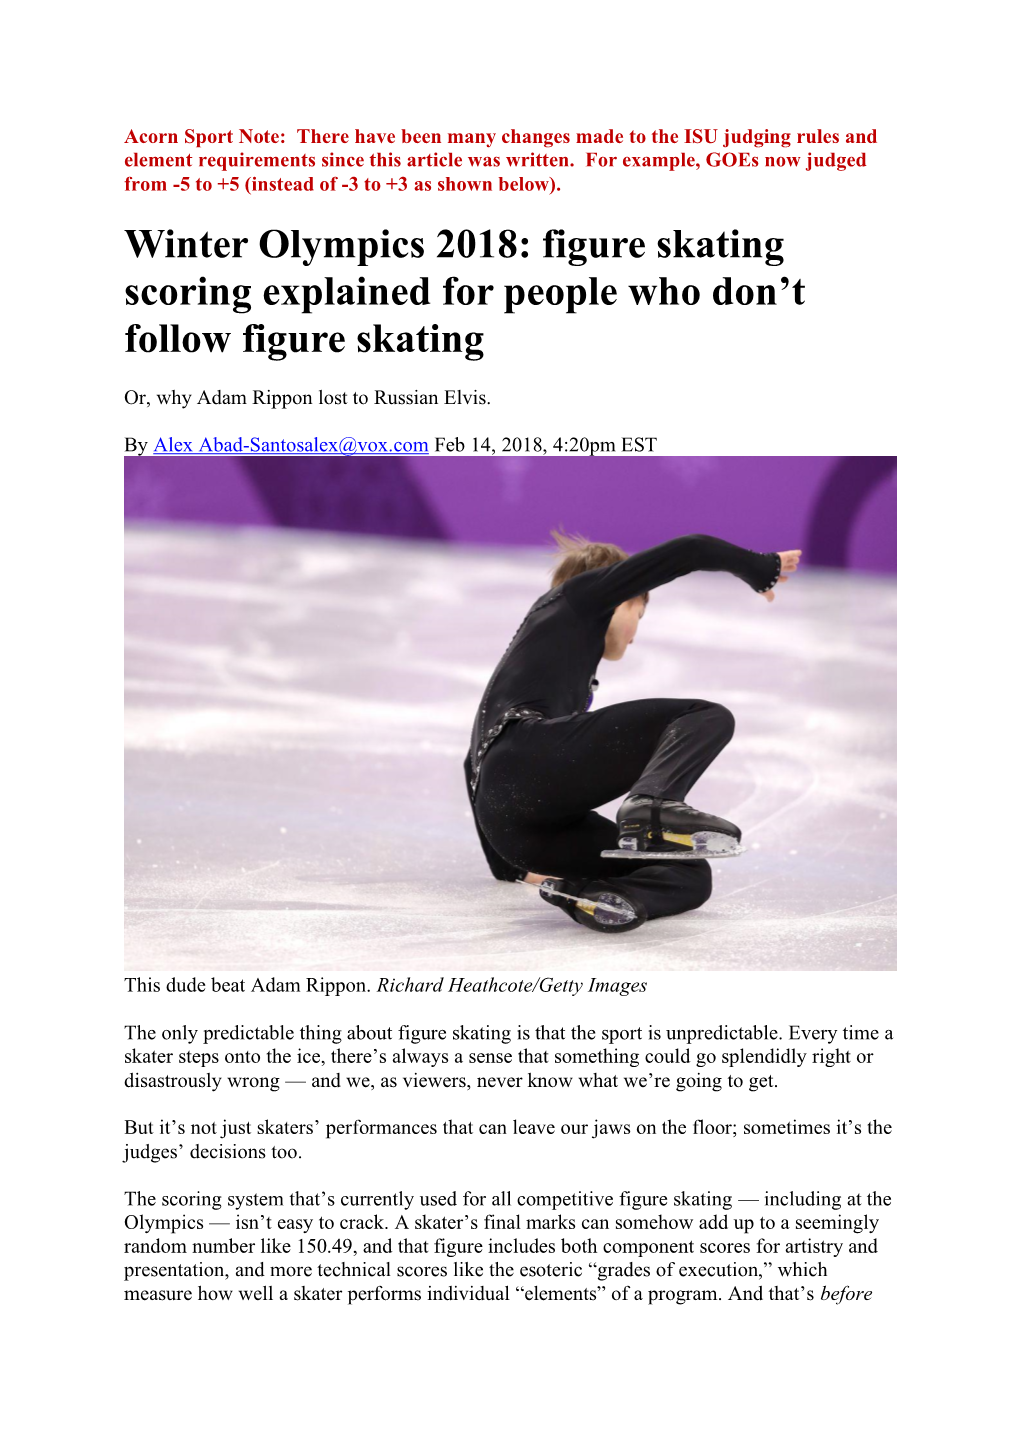 Winter Olympics 2018: Figure Skating Scoring Explained for People Who Don’T Follow Figure Skating